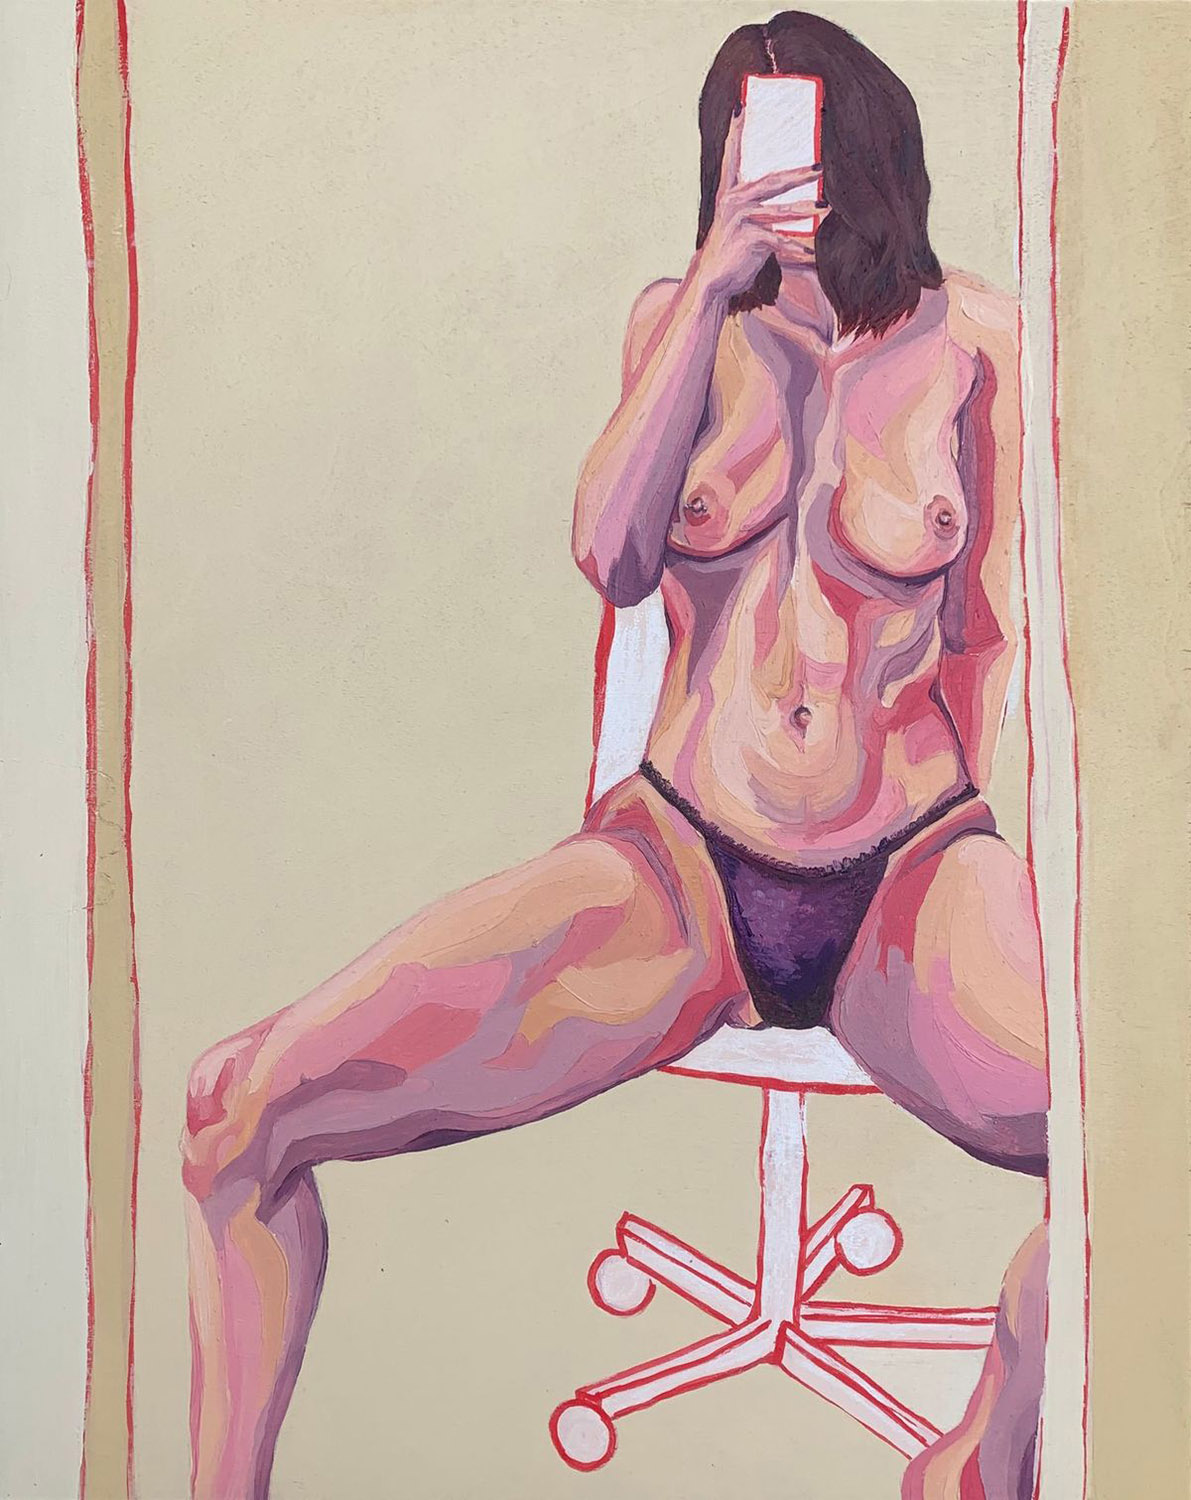 Painting of topless woman taking a selfie